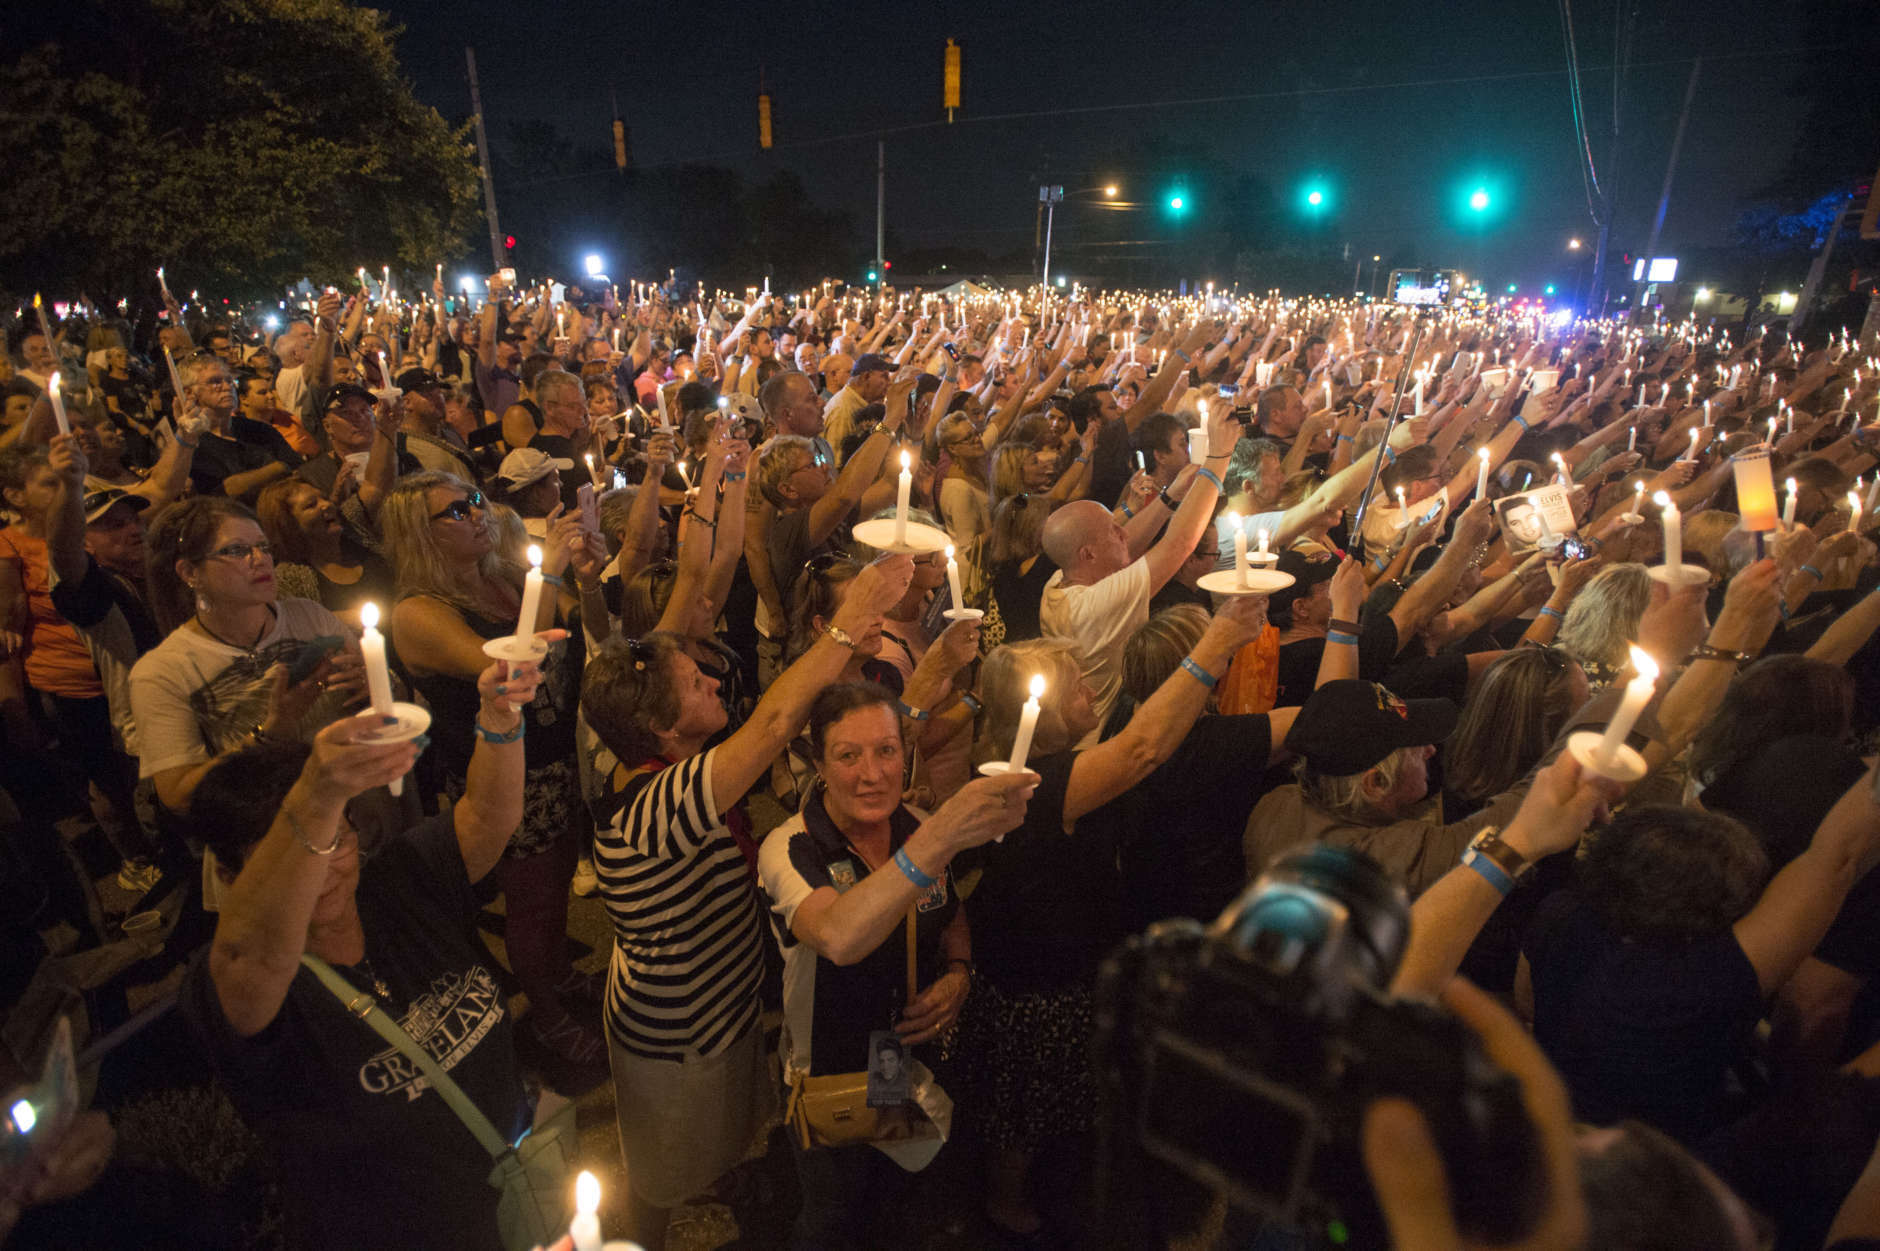 Fans hold candles during a vigil for Elvis Presley at Graceland, Presley's Memphis home, Tuesday, Aug. 15, 2017, in Memphis, Tenn. Fans from around the world are at Graceland for the 40th anniversary of his death. Presley died Aug. 16, 1977. (AP Photo/Brandon Dill)